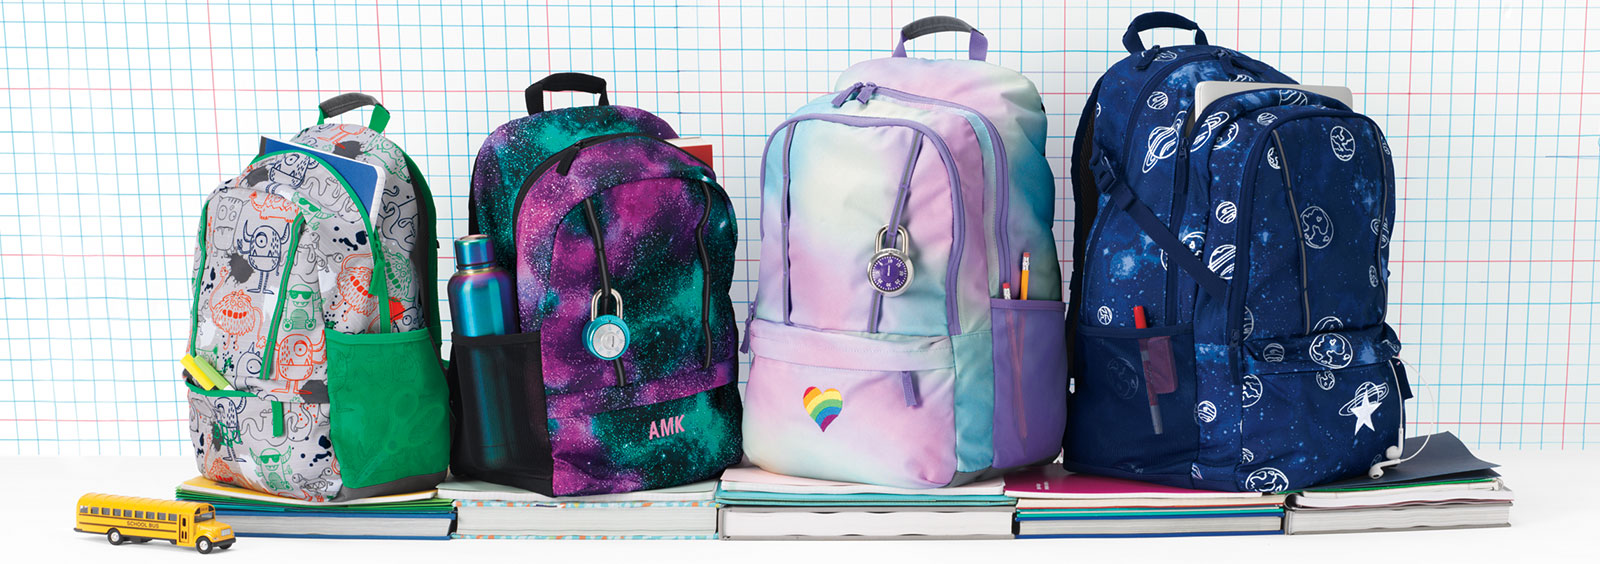 Backpacks or drawstring bags: which one works best?